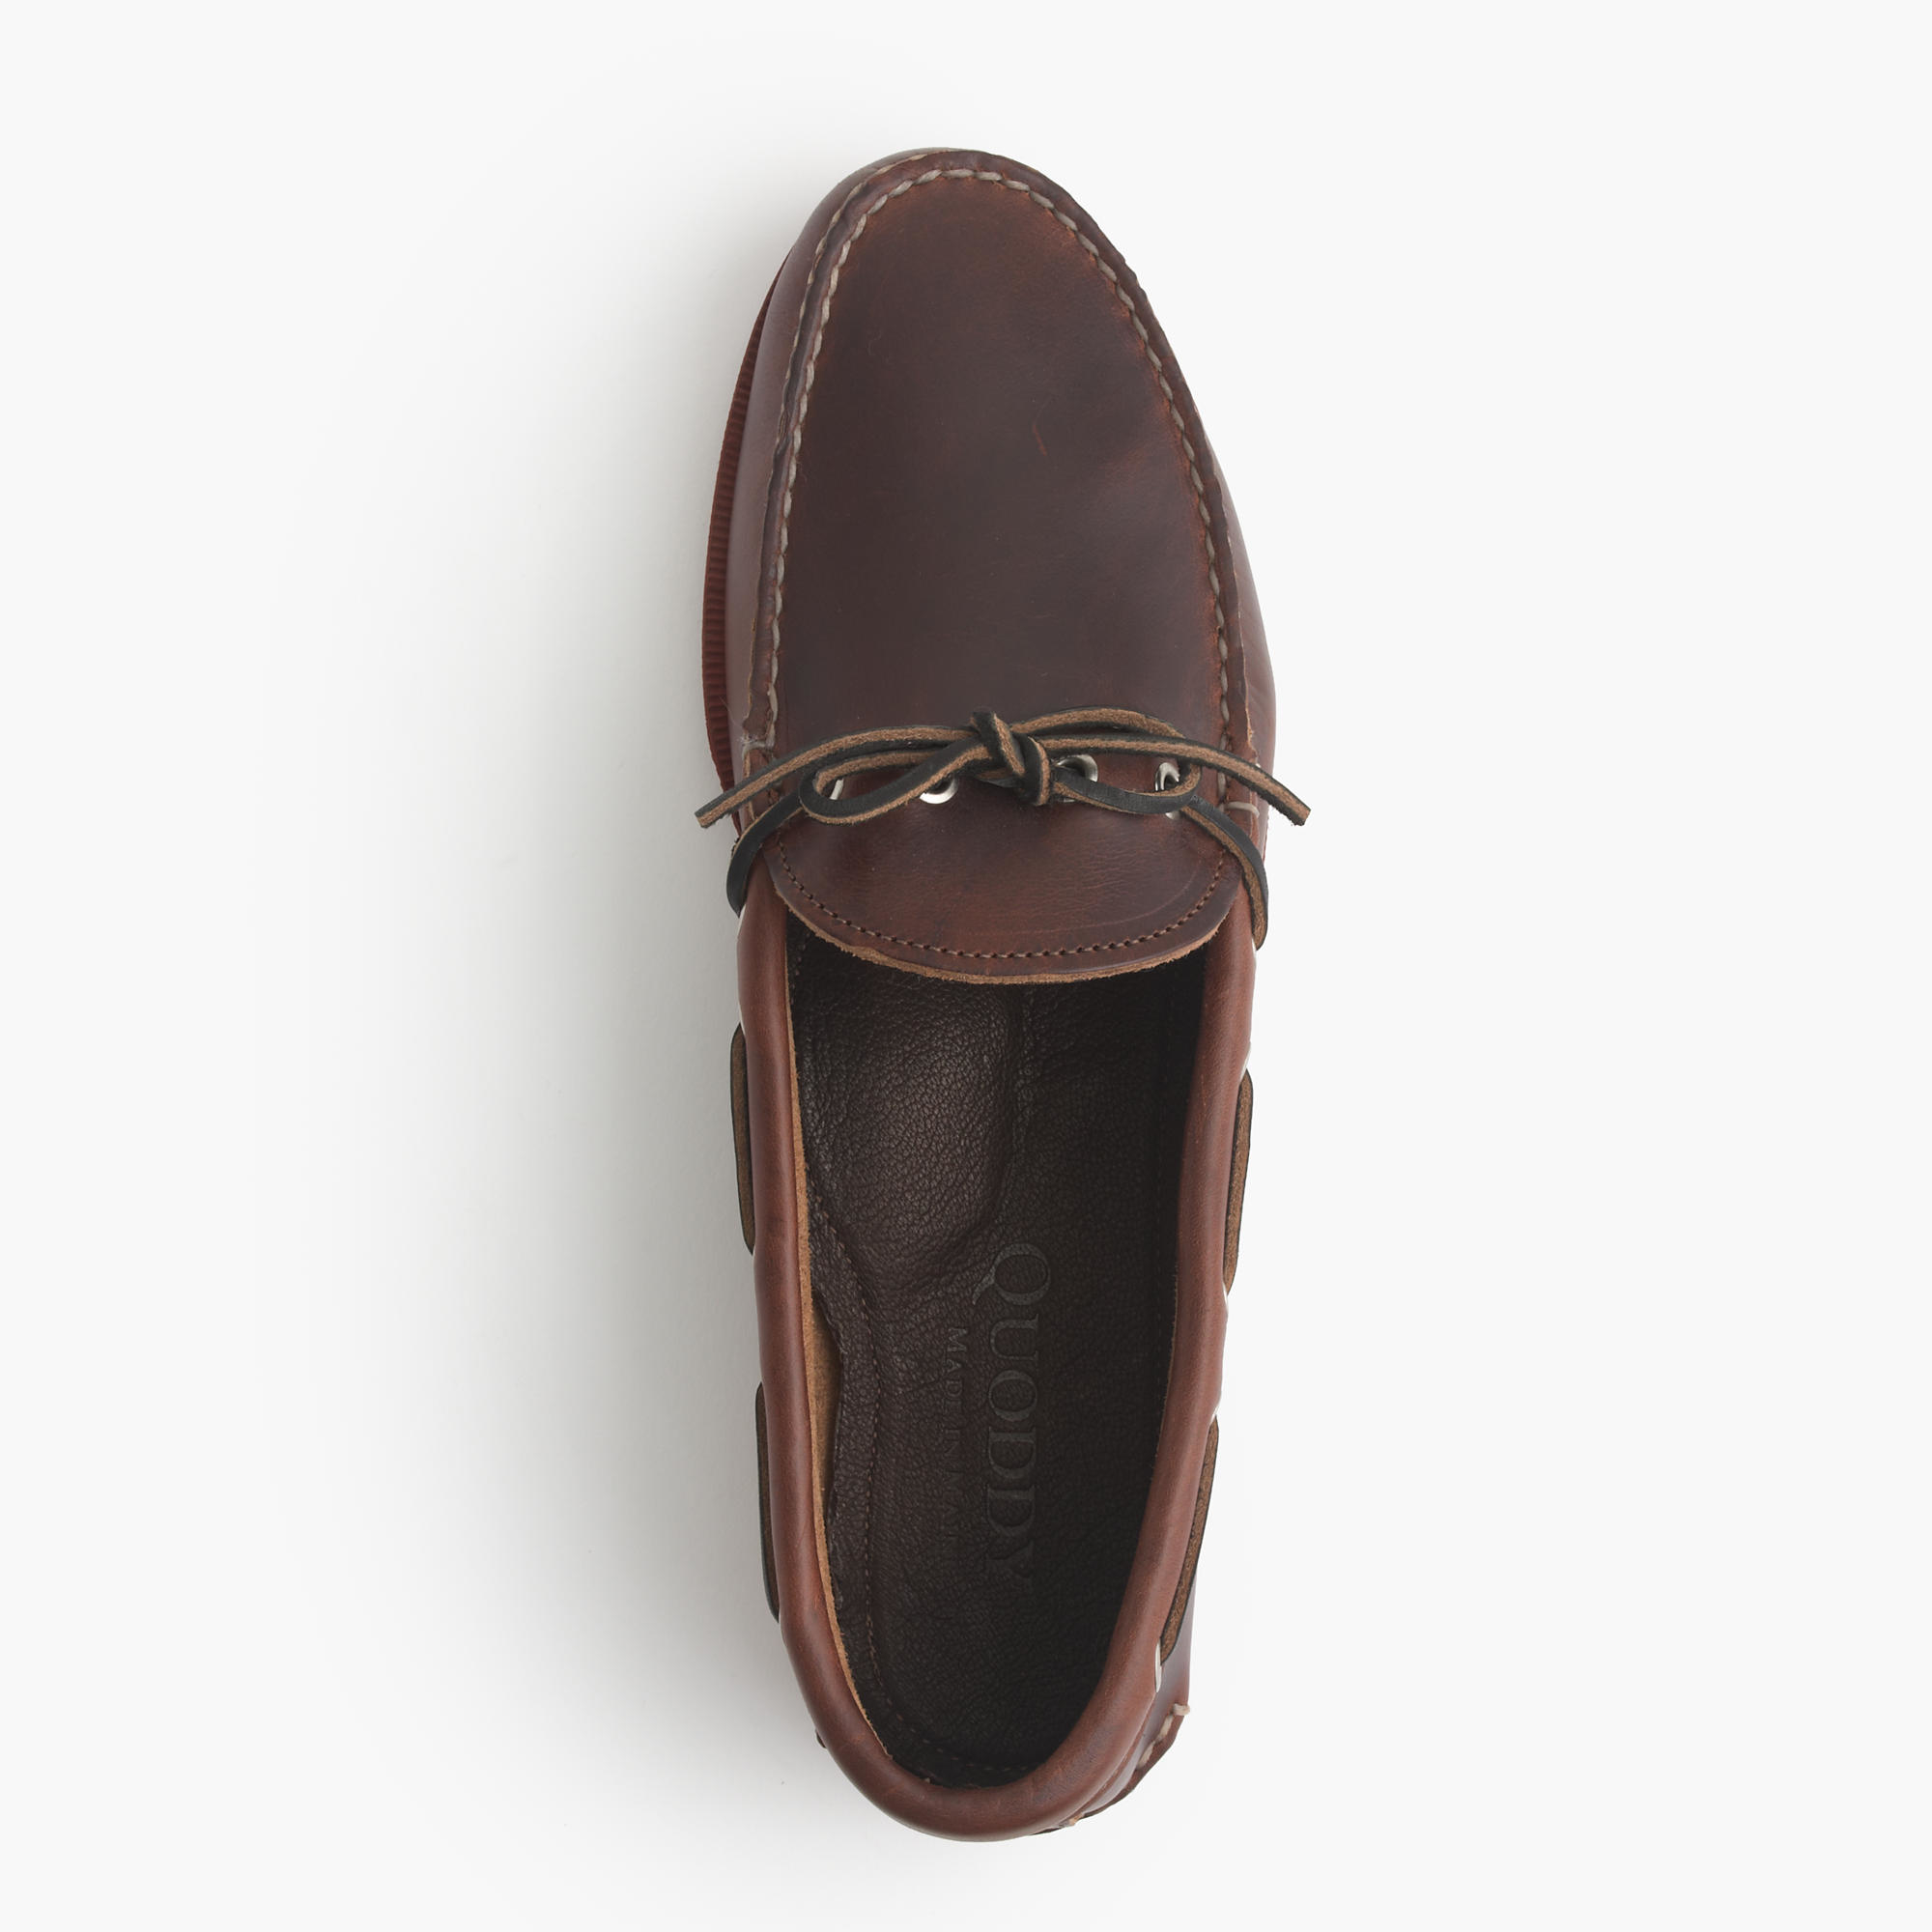 Quoddy canoe boat shoes